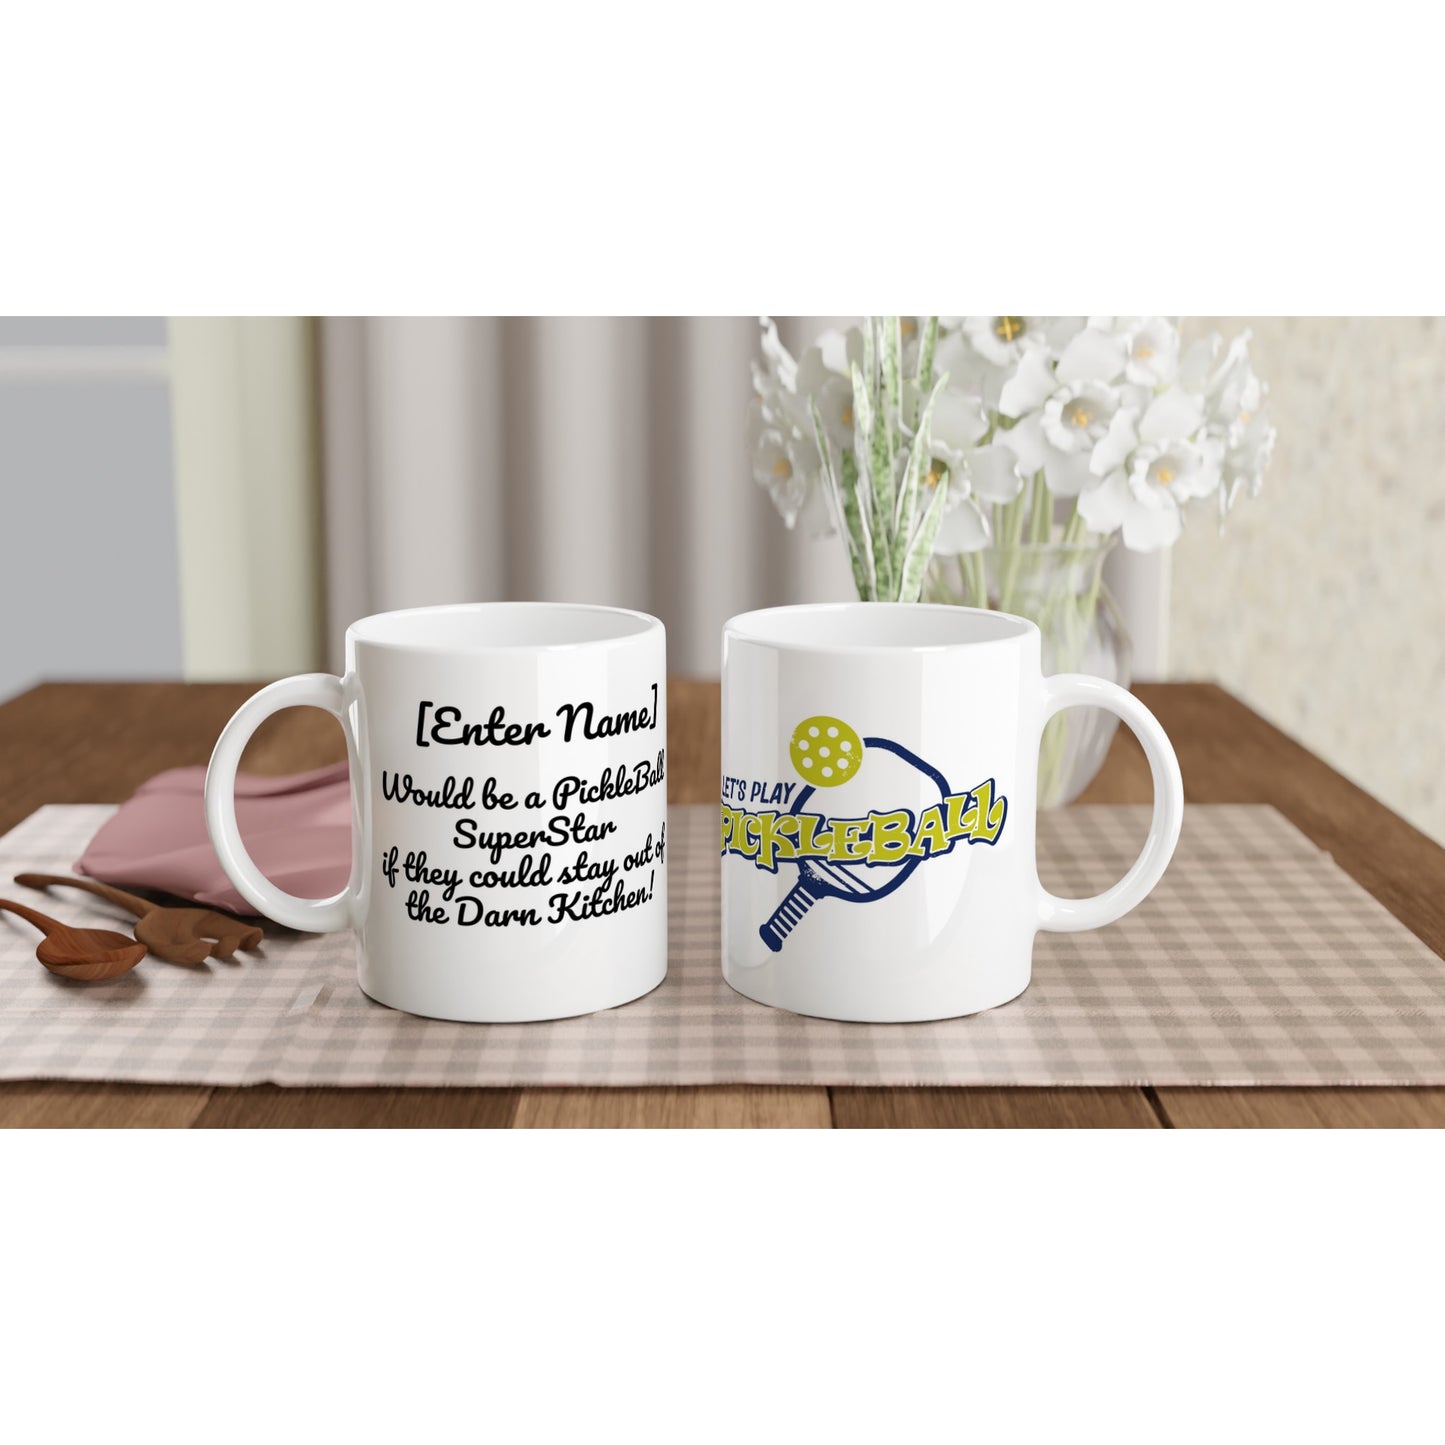 Two Personalized white ceramic 11oz mugs with motto Your Name Would be a PickleBall Superstar if they could stay out of the Darn Kitchen on front and Let's Play PickleBall logo on back coffee mugs are dishwasher and microwave safe from WhatYa Say Apparel sitting on coffee table with green and white placemat.